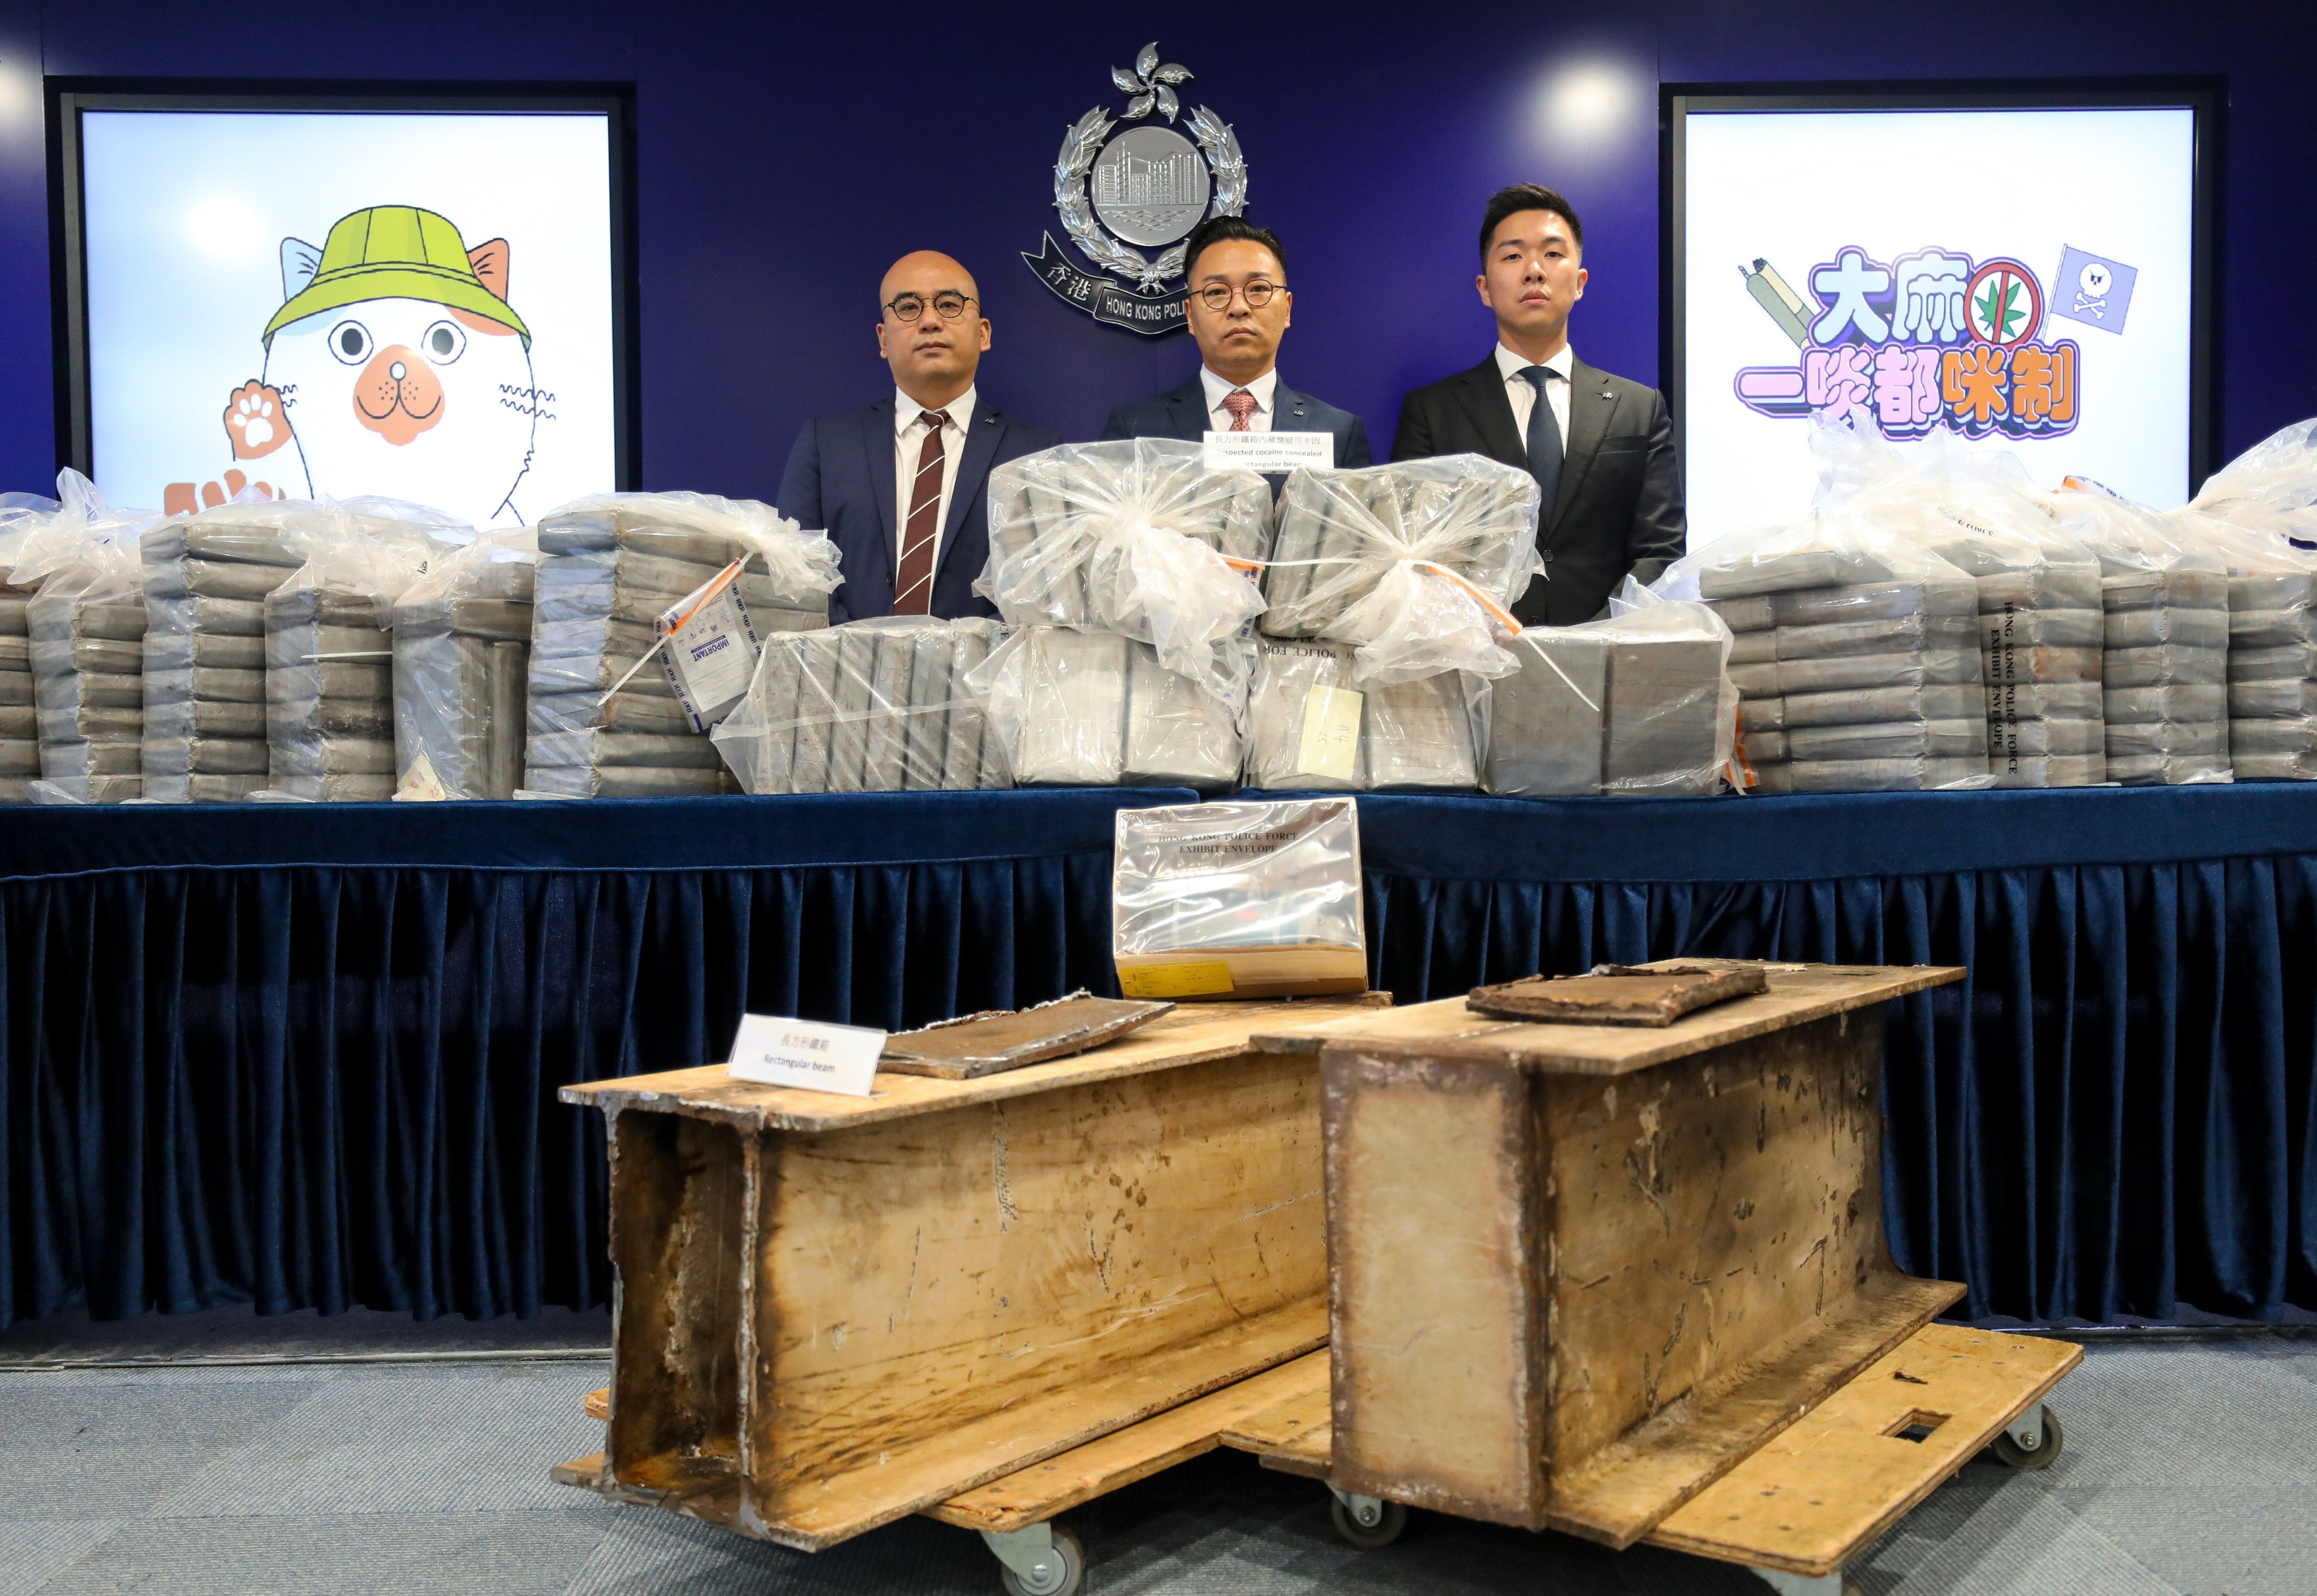 Police officers display the slabs of cocaine found hidden in scrap metal I-beams. Photo: Xiaomei Chen